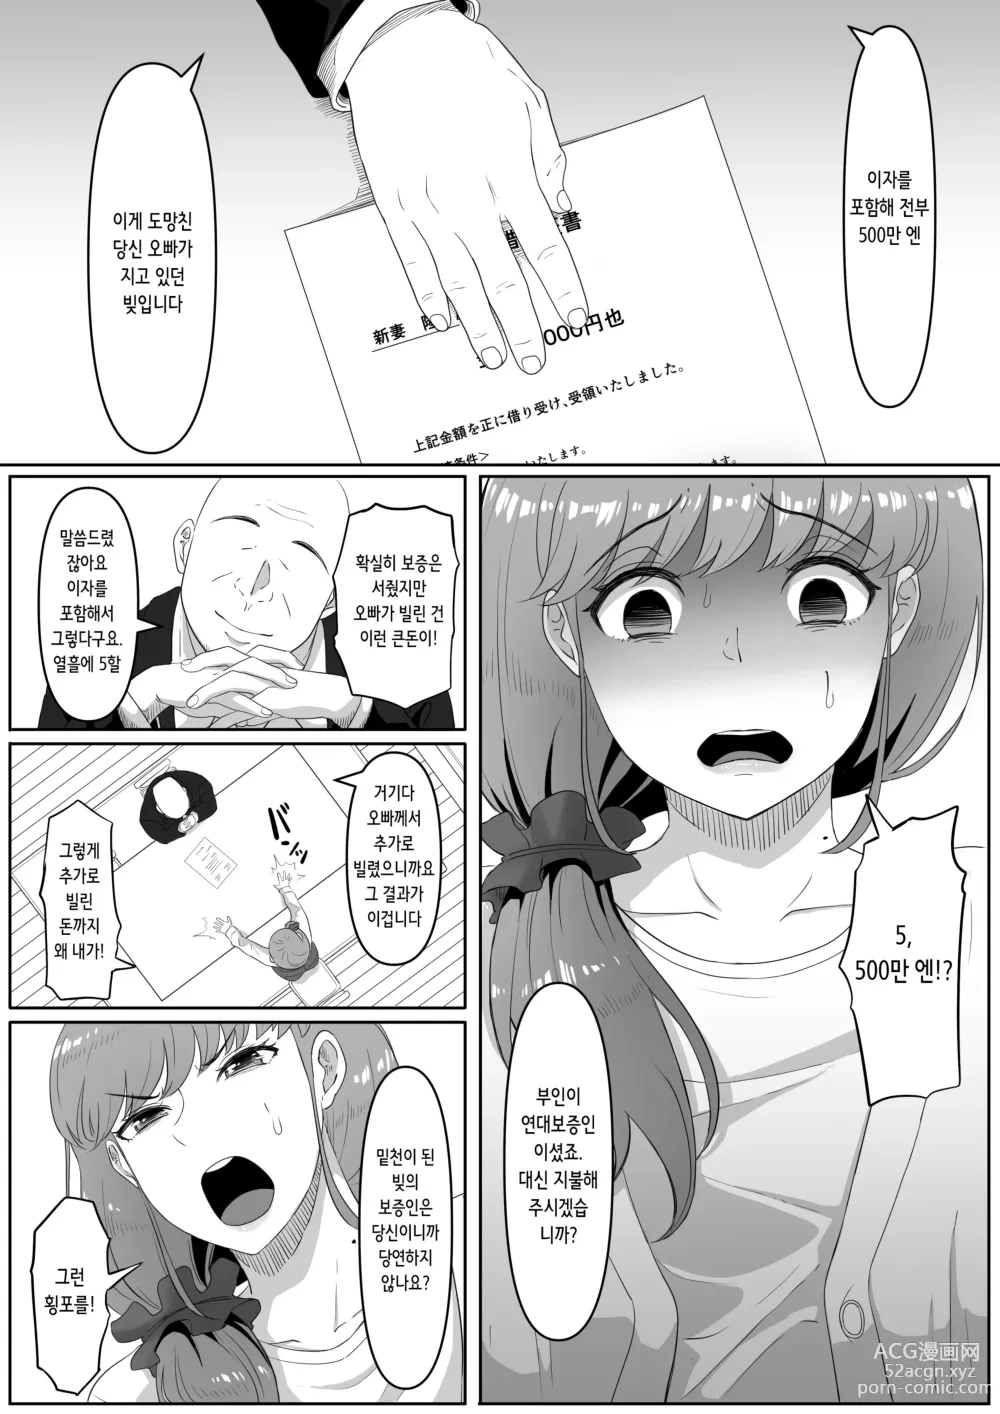 Page 6 of doujinshi 뒷구멍 변녀